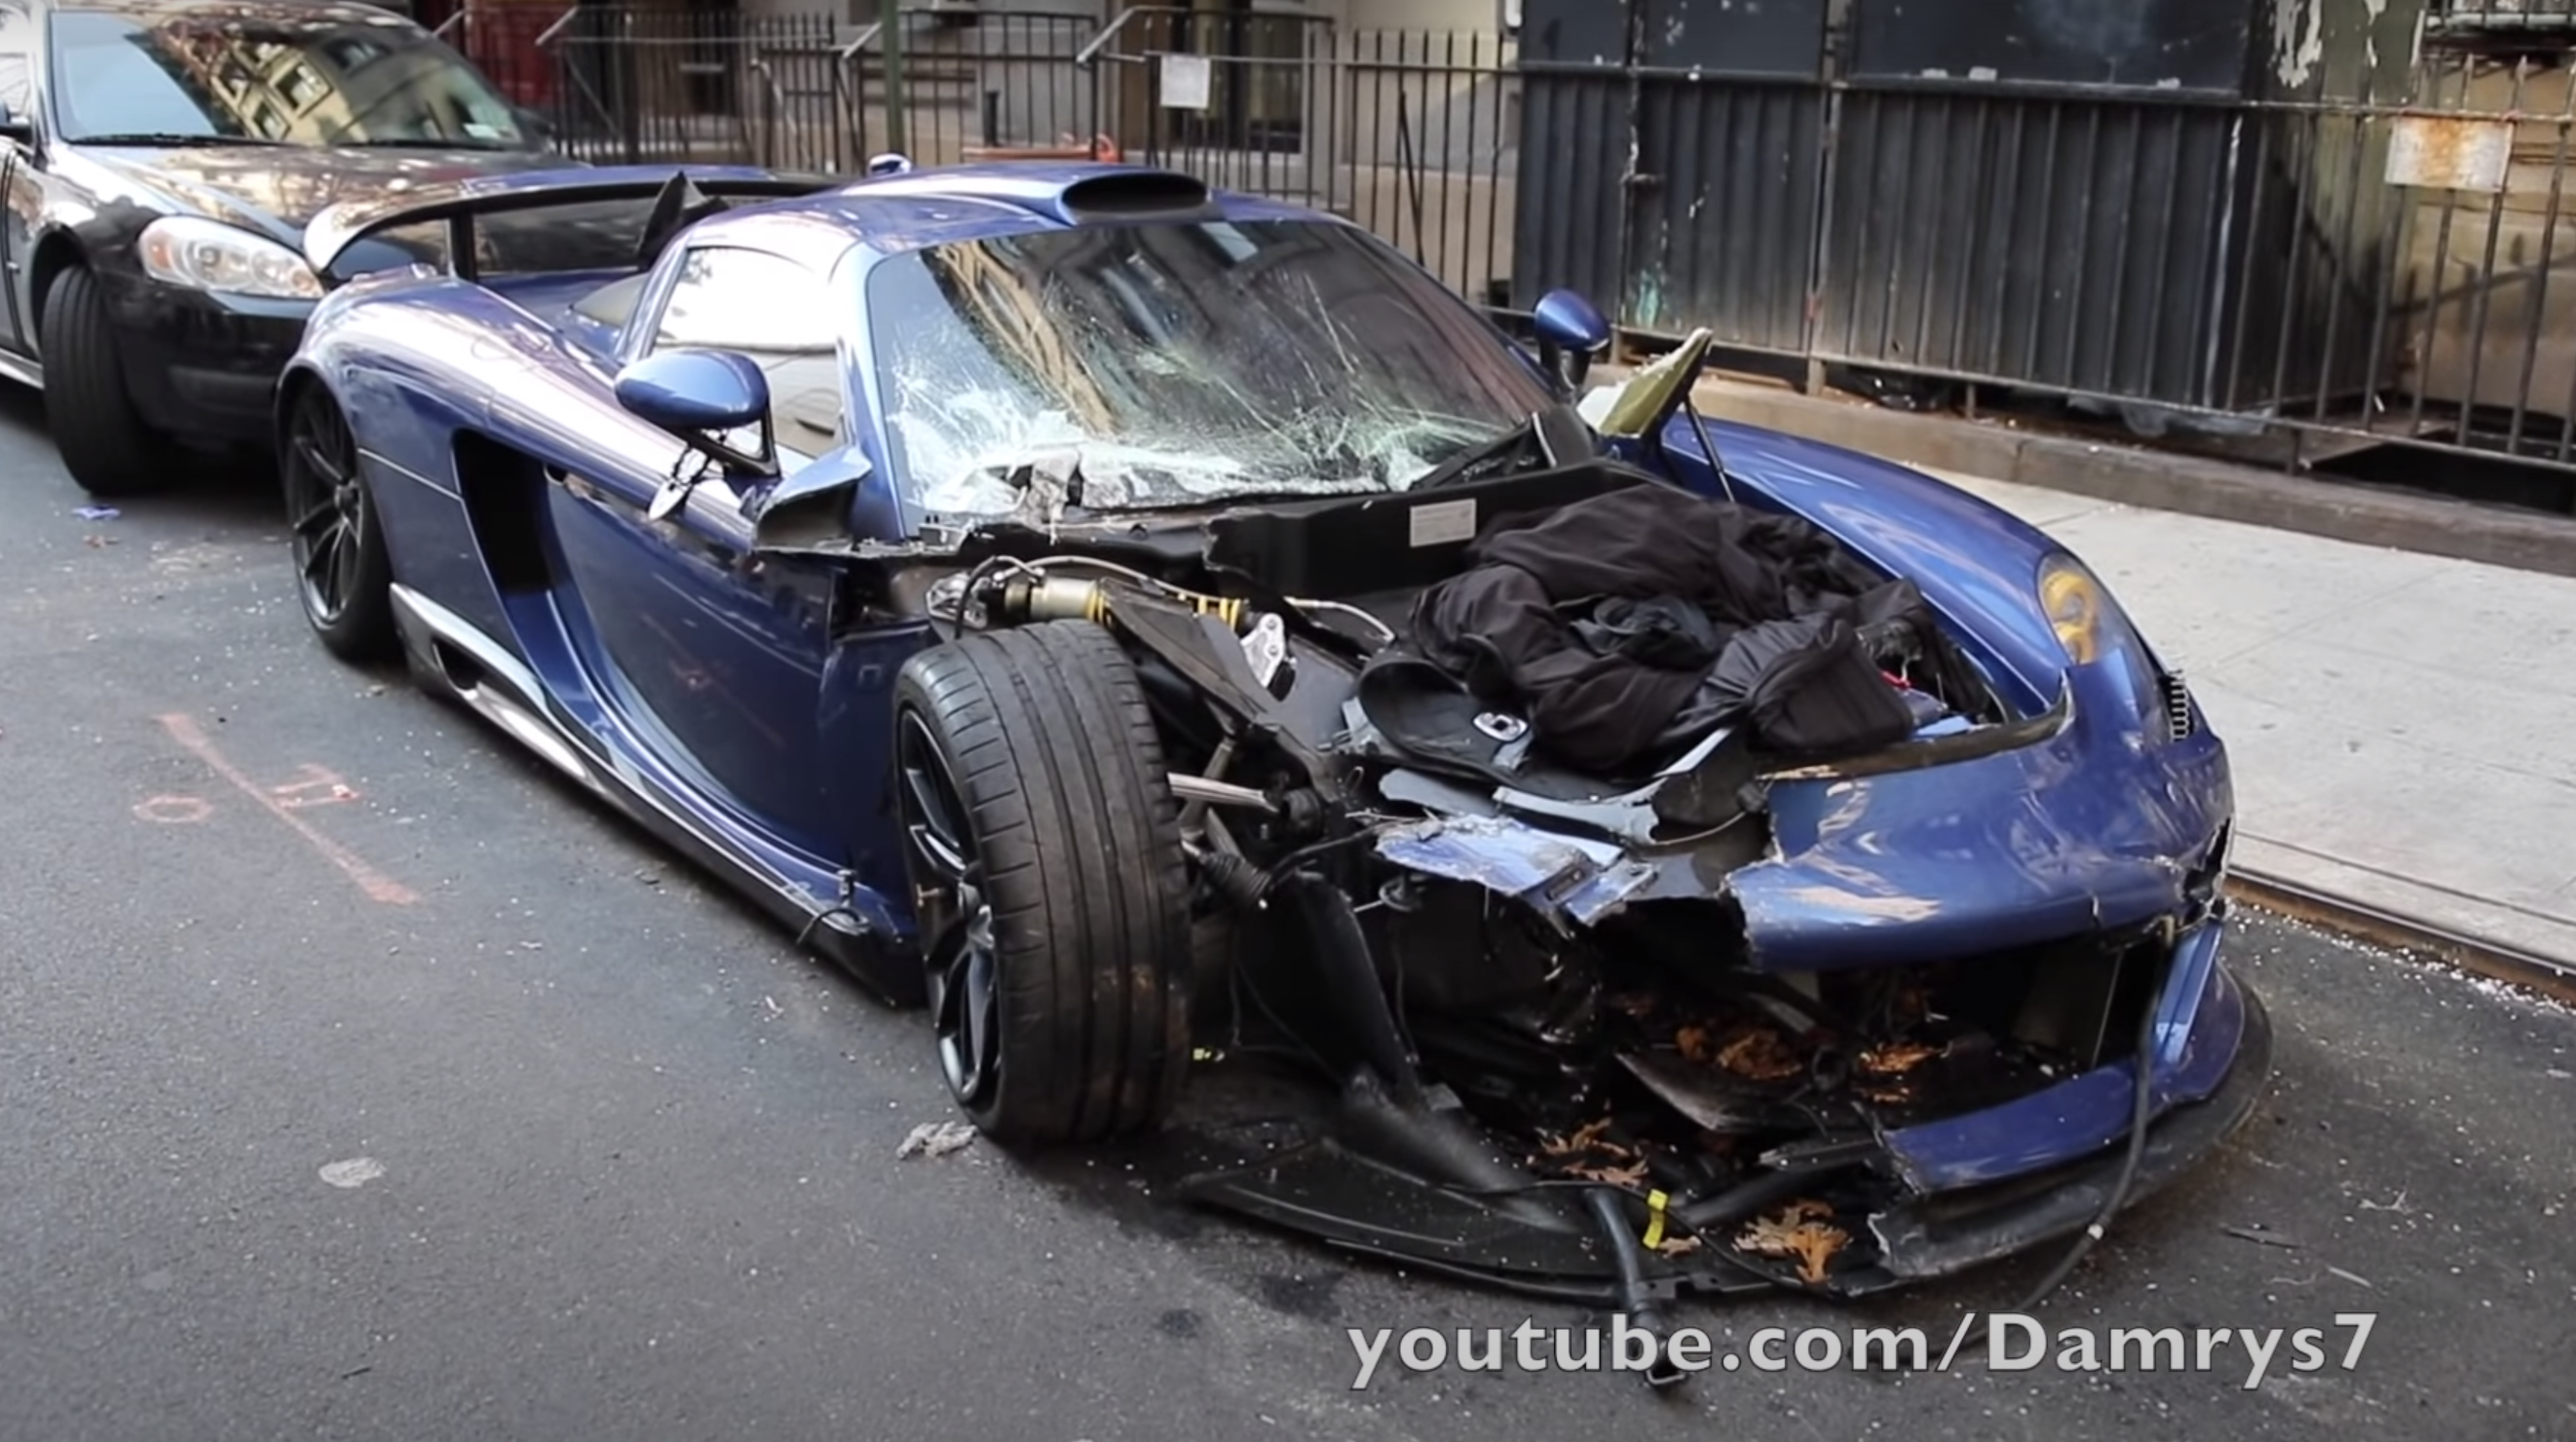 Gemballa Mirage GT Owner Who Wrecked in NY Gets Charges Dropped